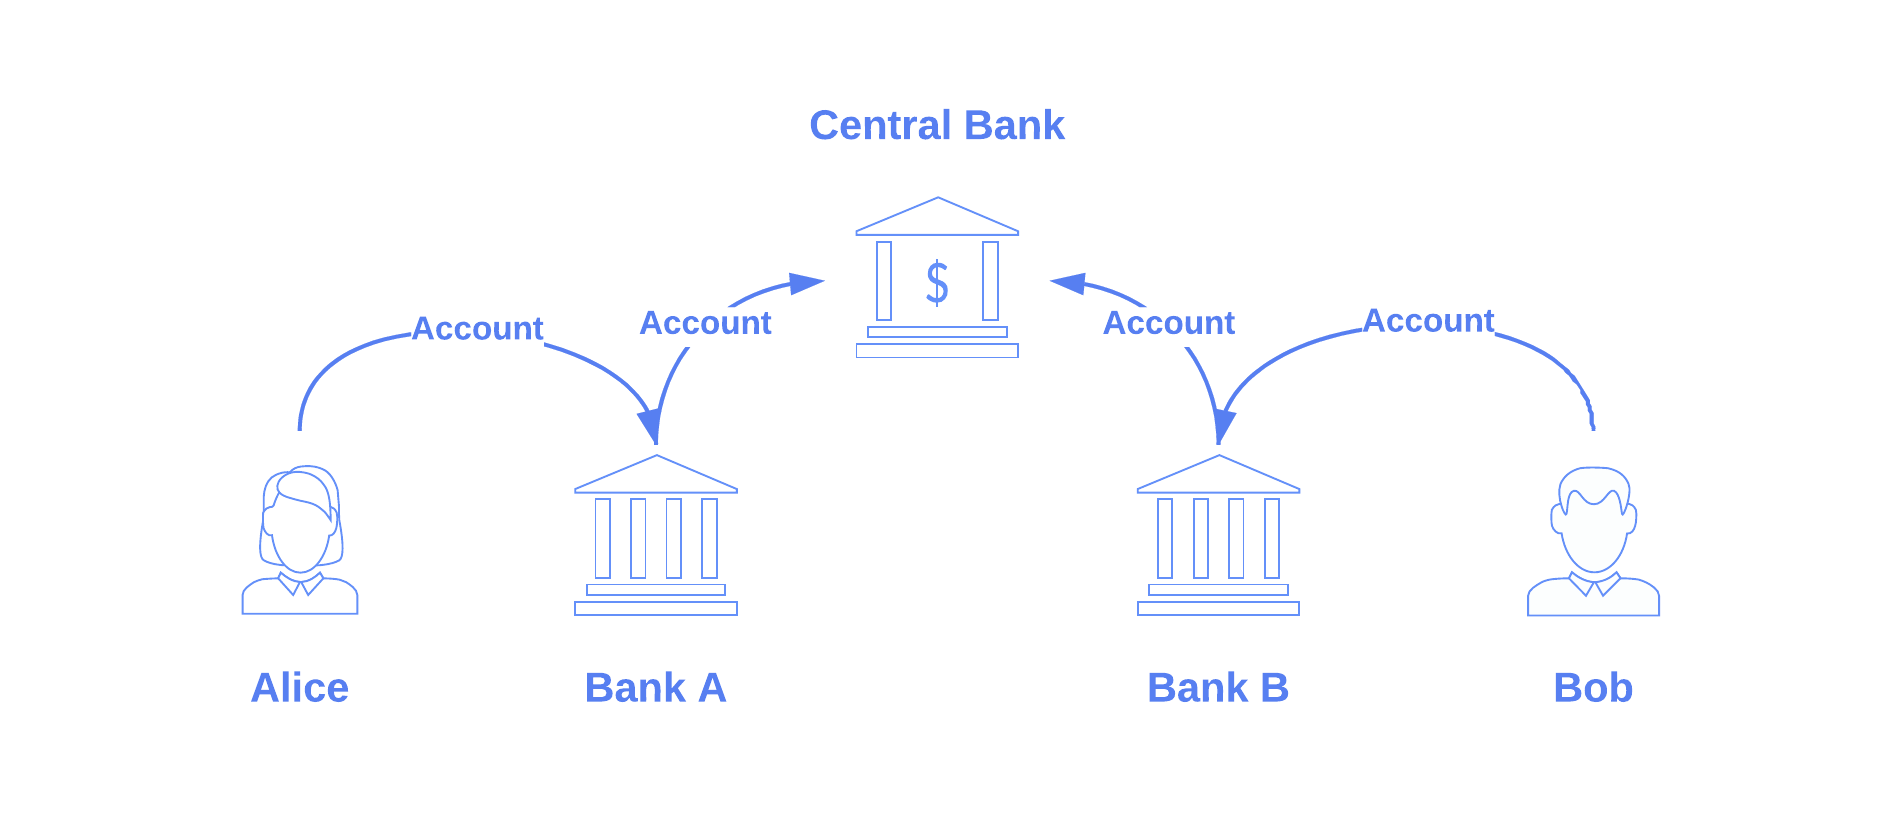 Hierarchical account structure. Alice has an account at Bank A. Bob has an account at Bank B. Bank A and Bank B have an account at the Central Bank.